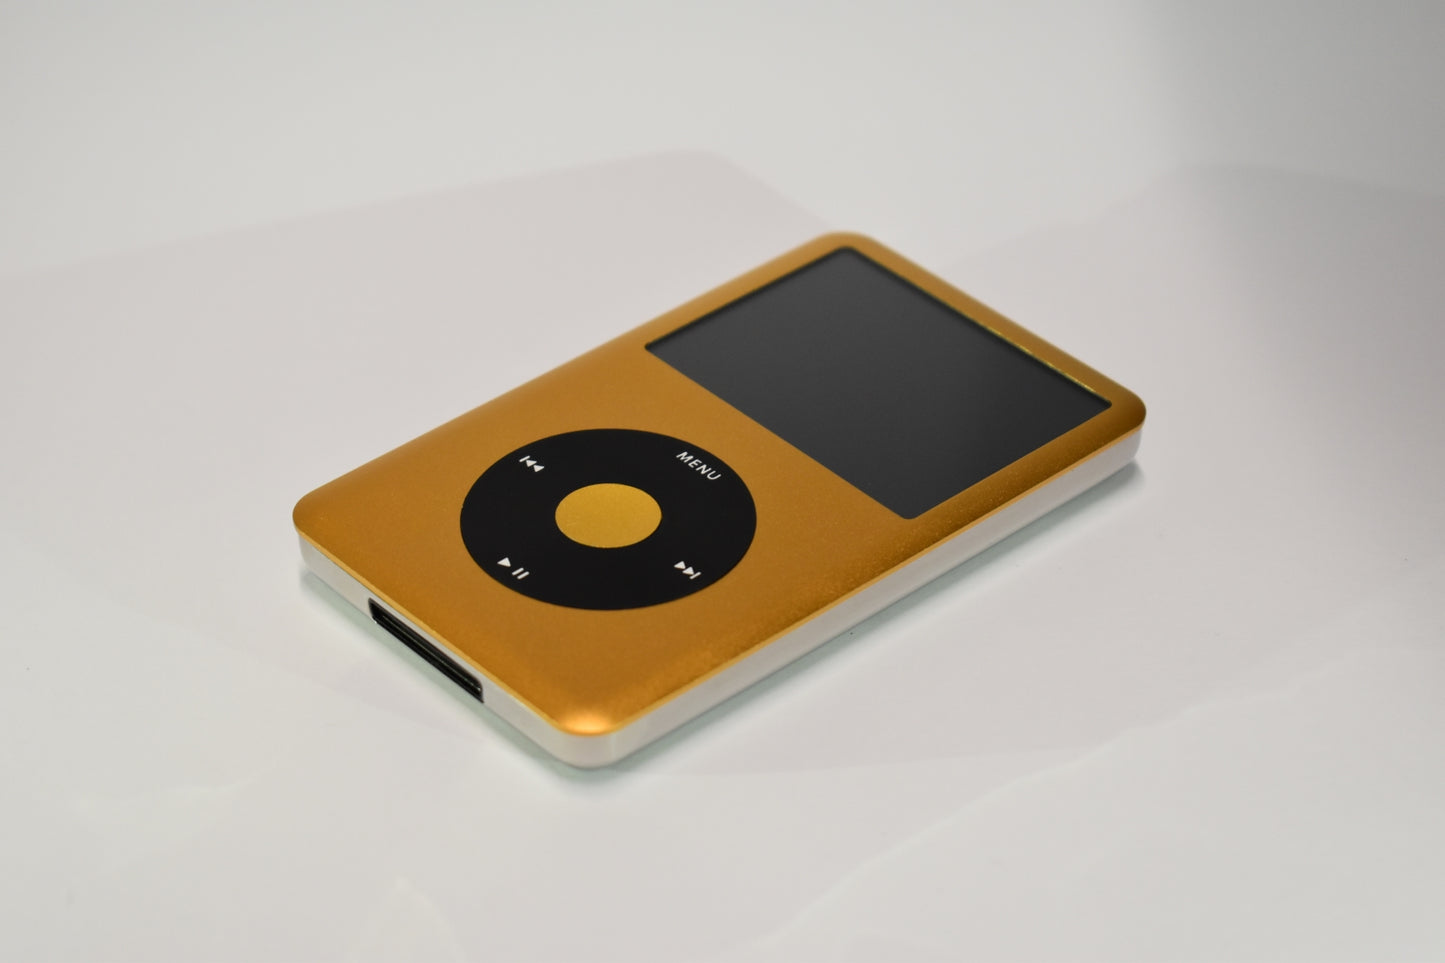 iPod classic - Gold and Black | Flash Storage and Extended Battery